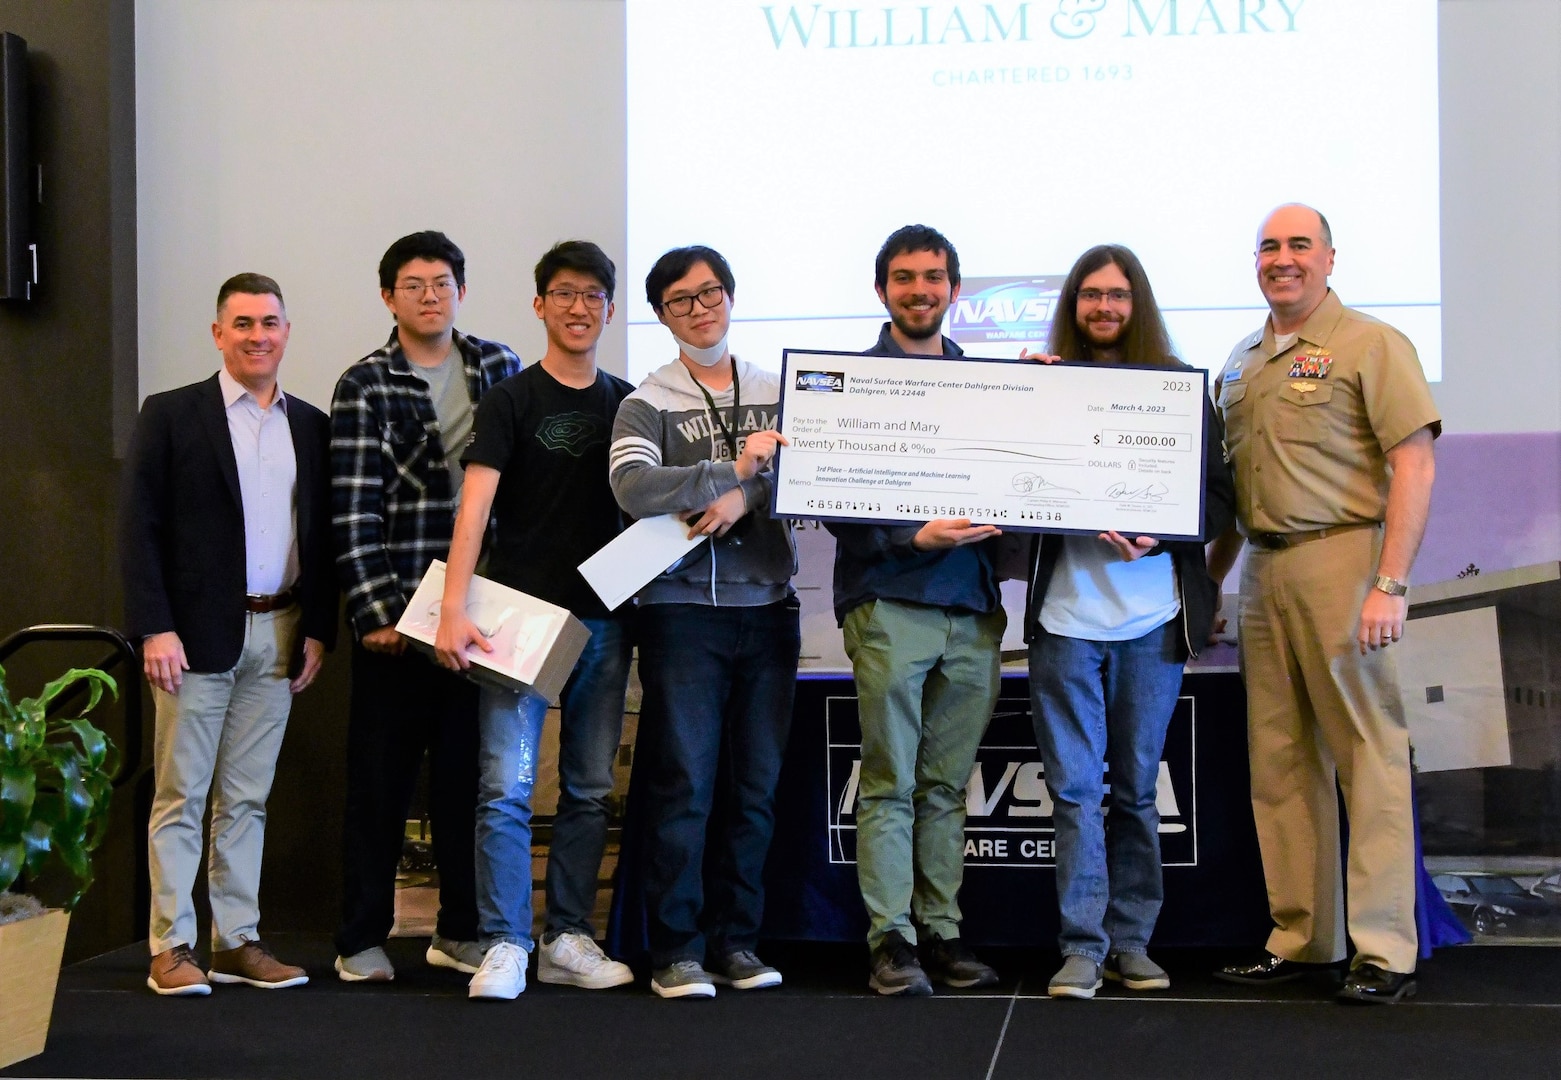 IMAGE: William & Mary (W&M) placed third in the Artificial Intelligence and Machine Learning Innovation Challenge at Dahlgren to earn a prize of $20,000.  Pictured from left to right are: NSWCDD Technical Director Dale Sisson, SES, along with W&M team members Kyle Chen, Kevin Wu, Joseph Lee, Nicholas Wilson, Stephen Hoag and NSWCDD Commanding Officer, Capt. Philip Mlynarski.